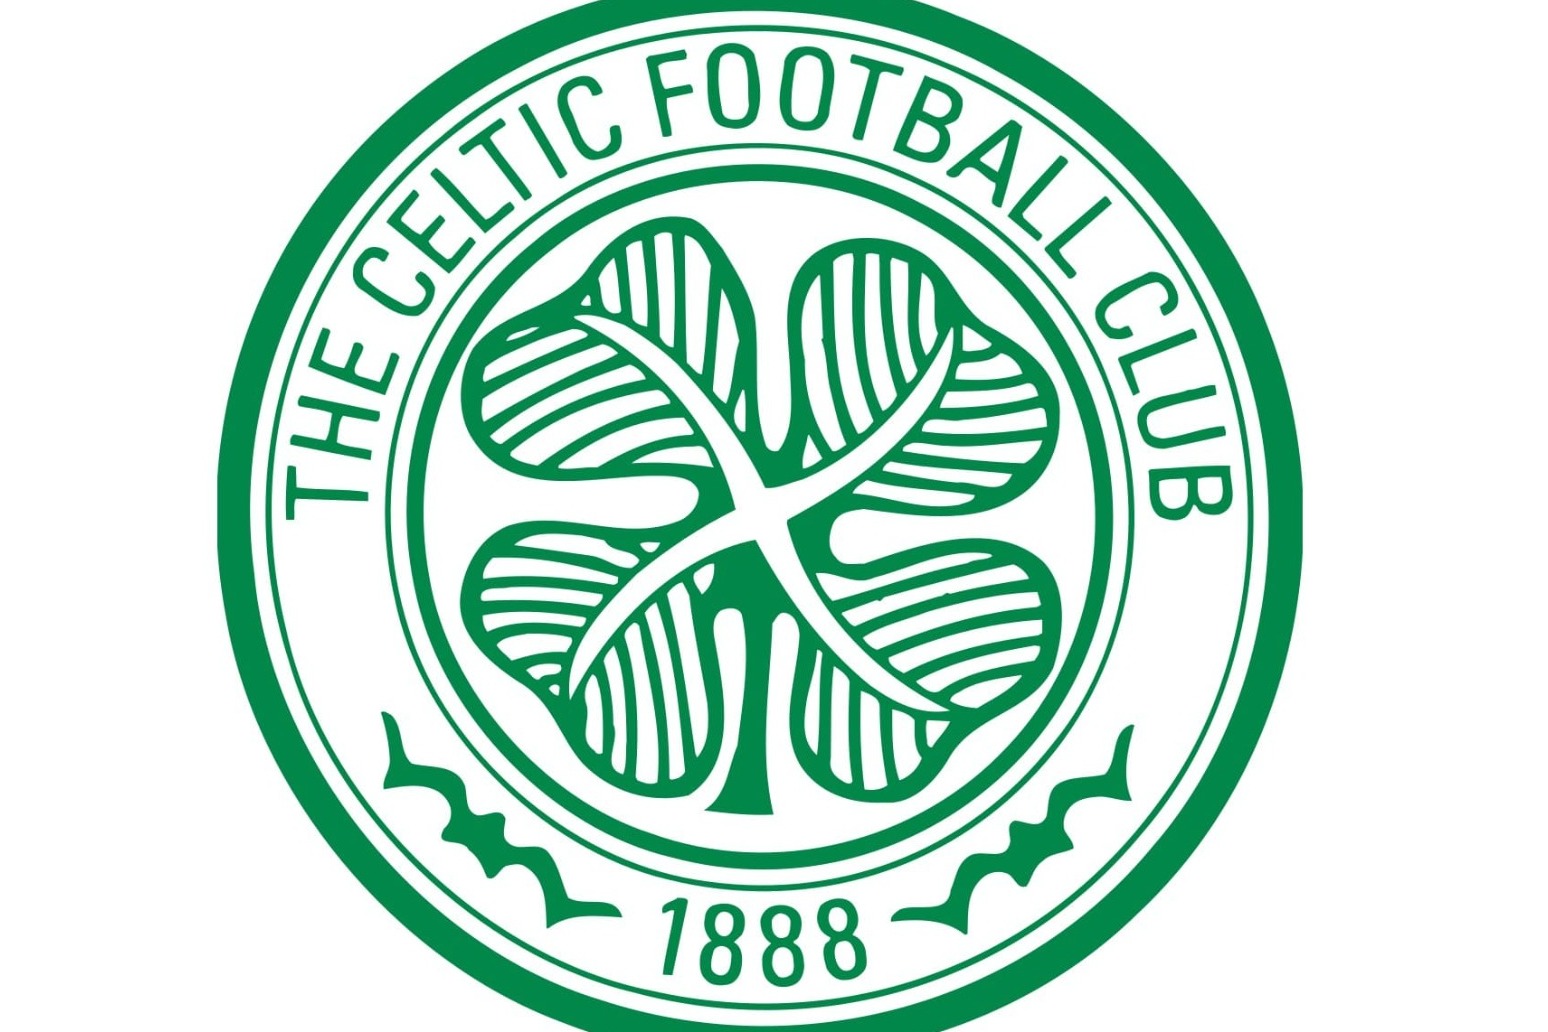 Celtic’s Europa Conference League campaign ended by Bodo/Glimt 